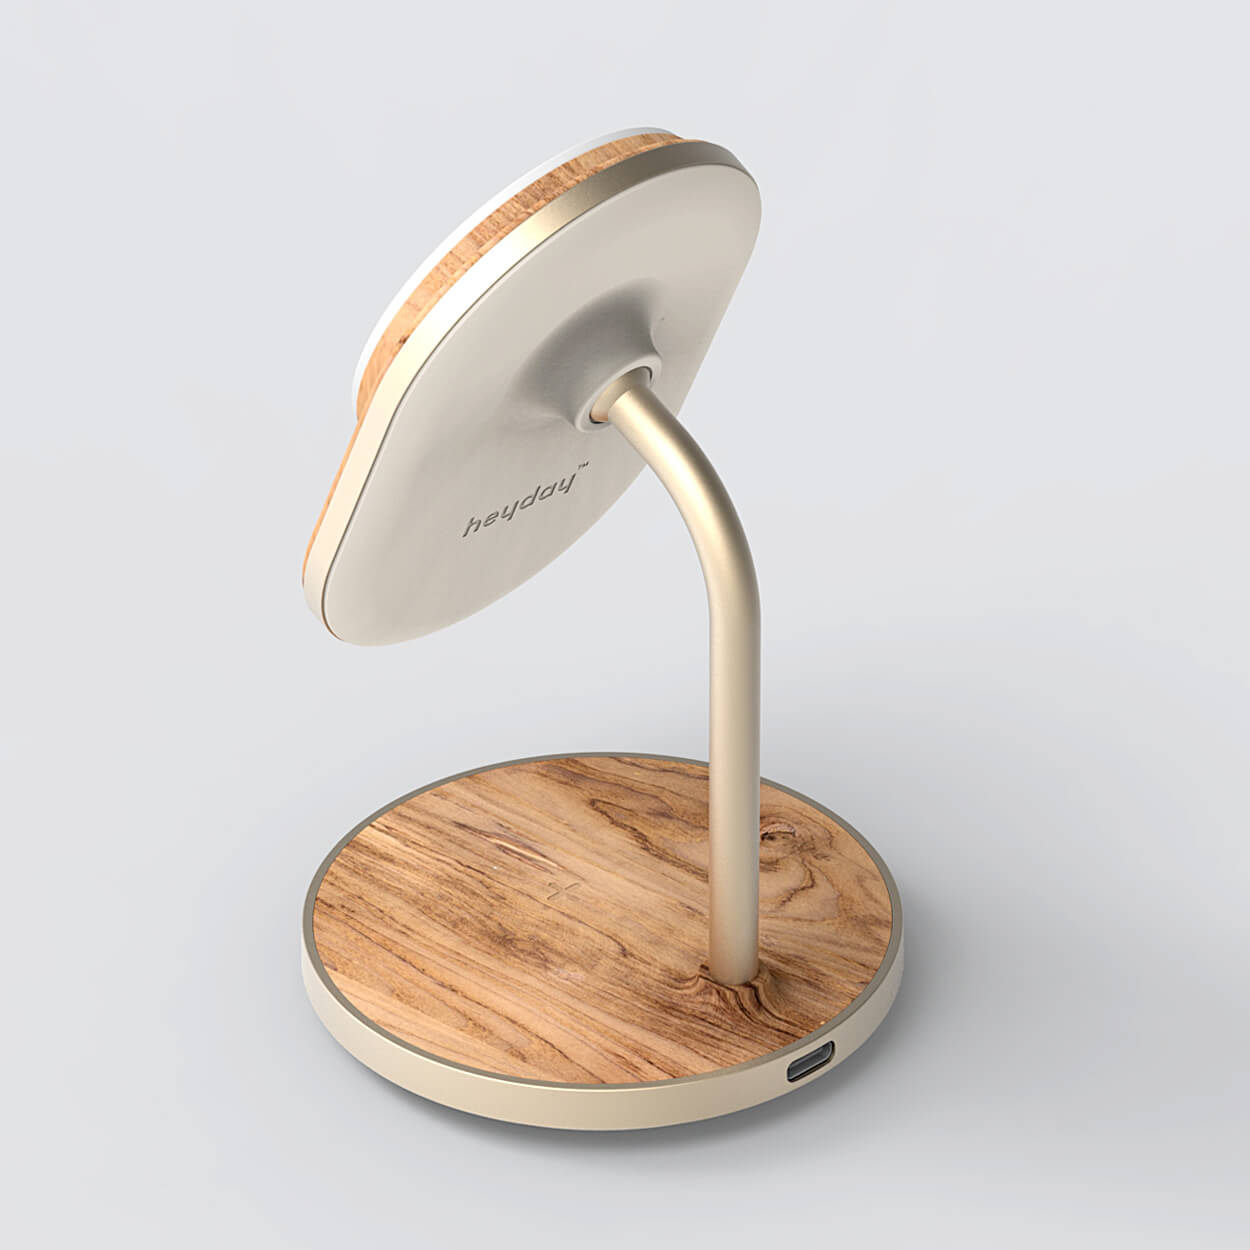 MagSafeAirPod-Charging-Stand-Wood-01